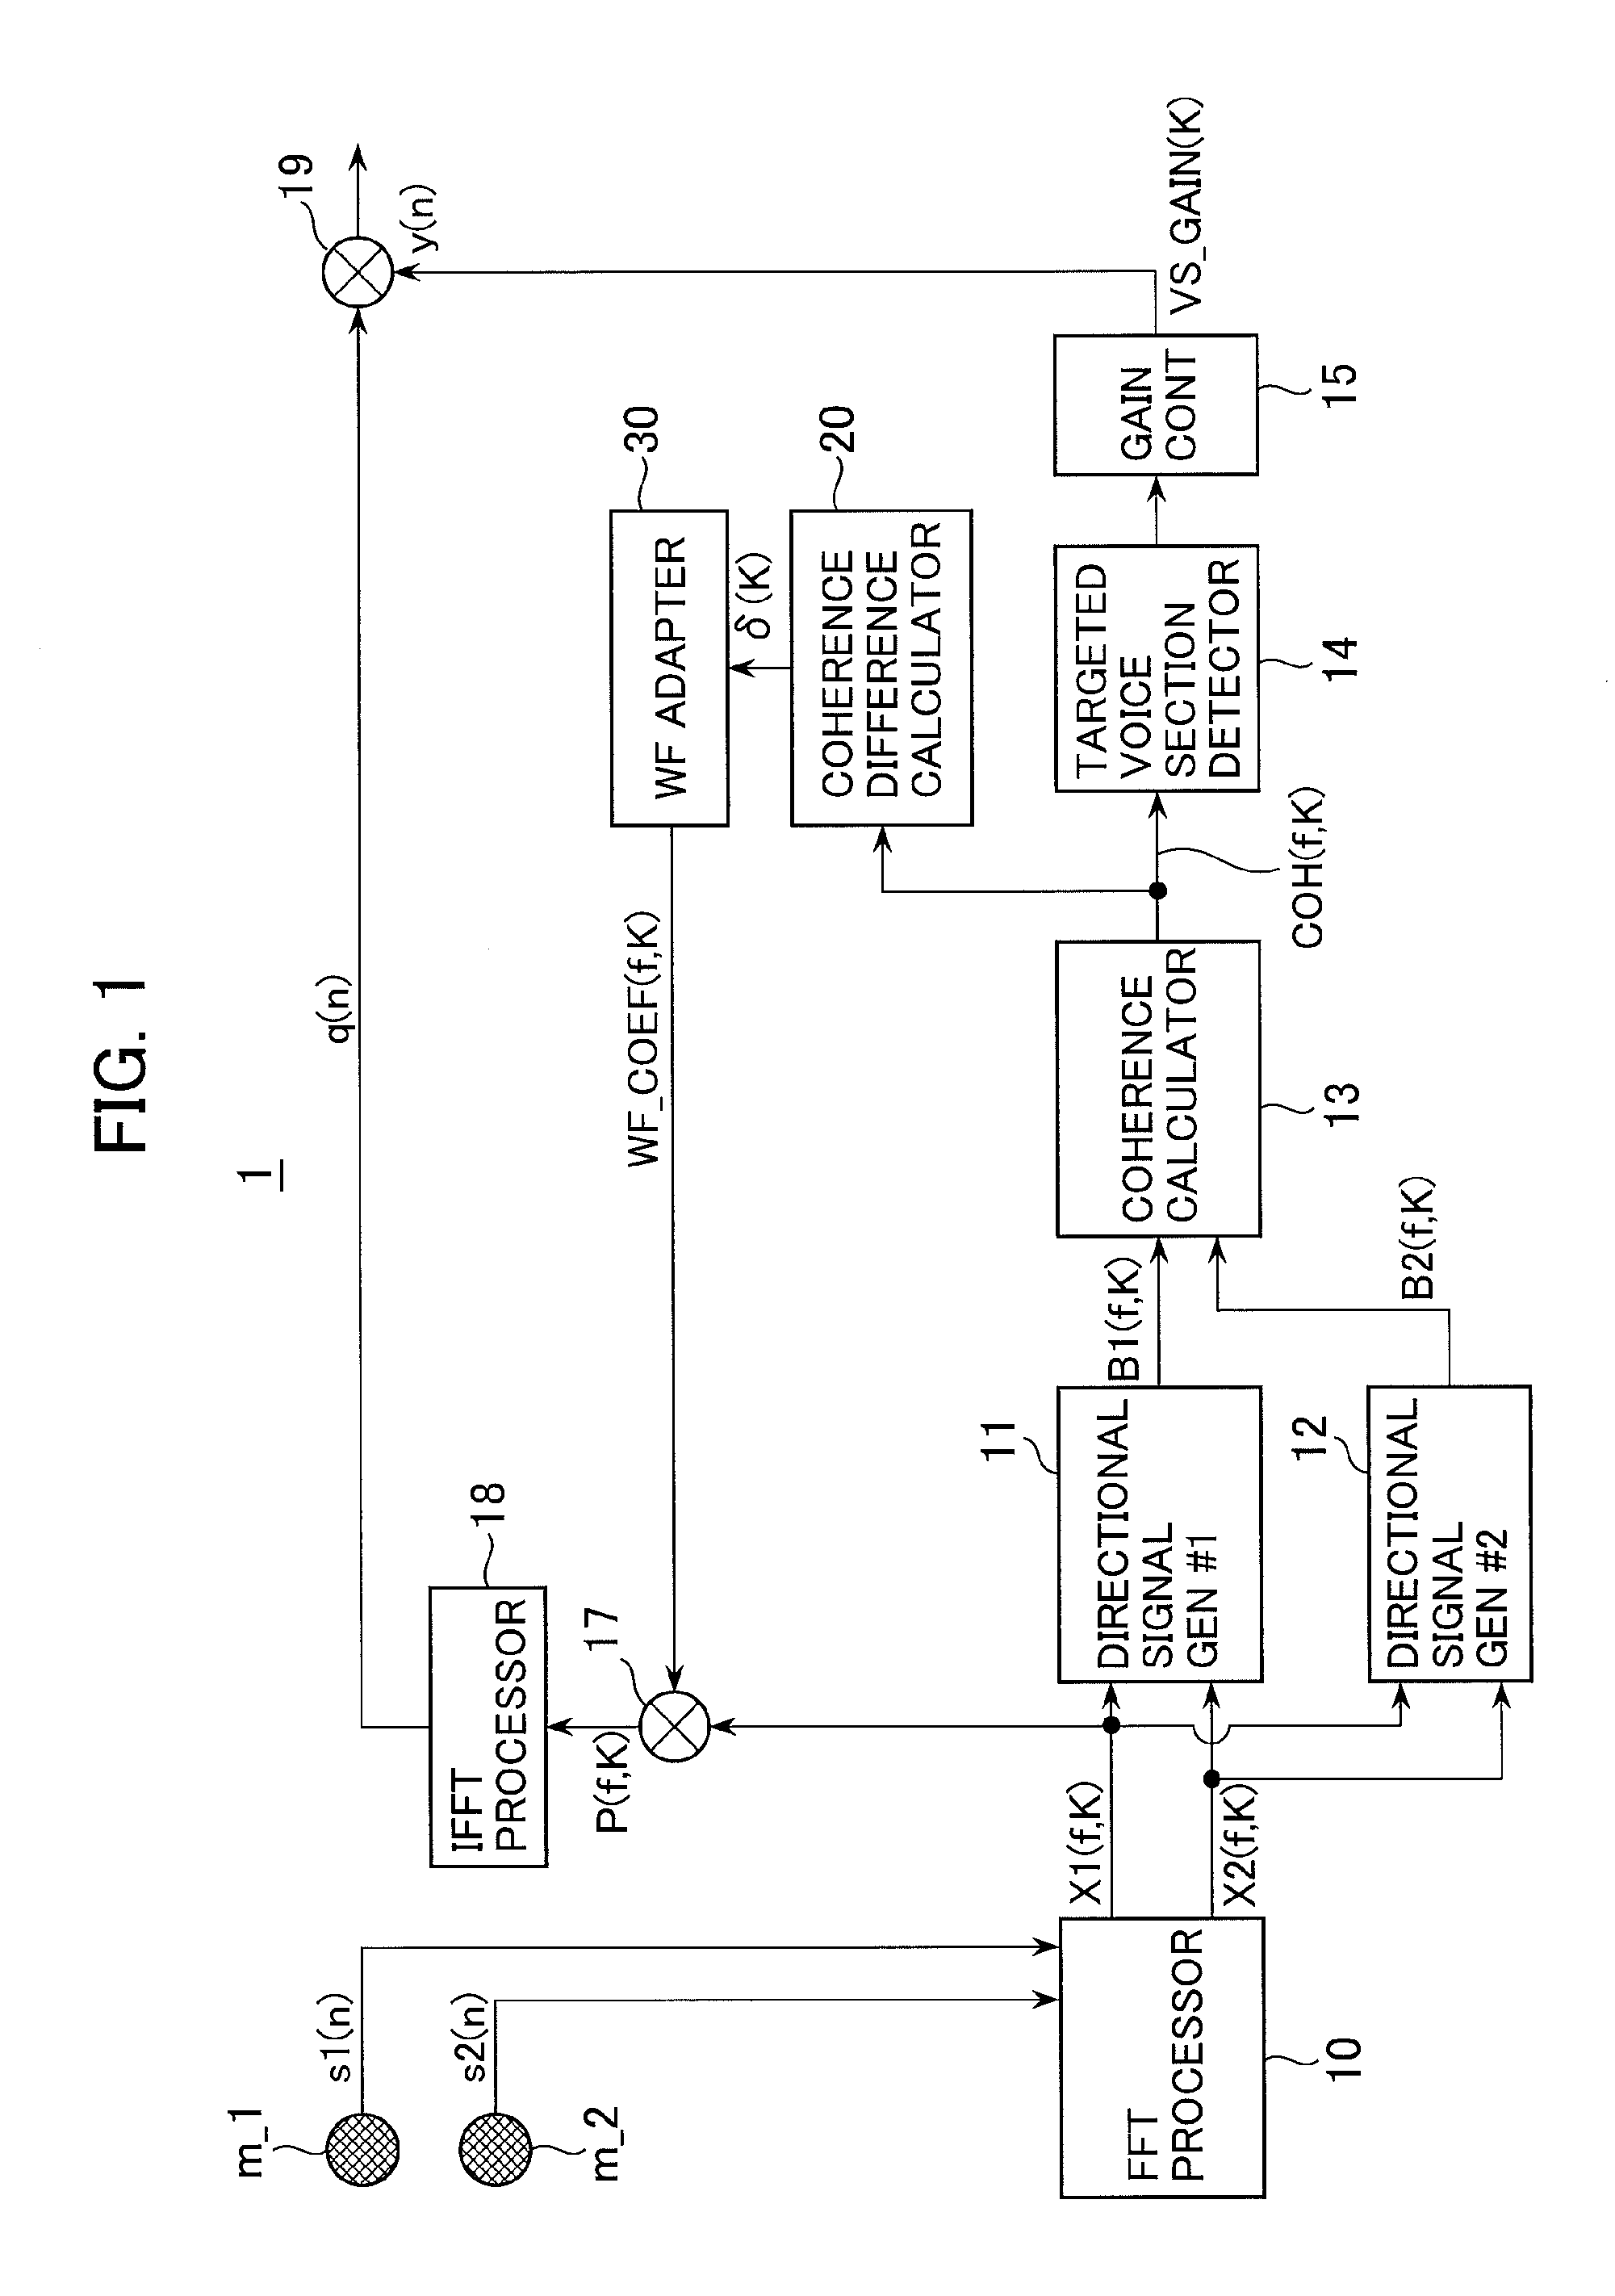 Apparatus and method for suppressing noise from voice signal by adaptively updating wiener filter coefficient by means of coherence